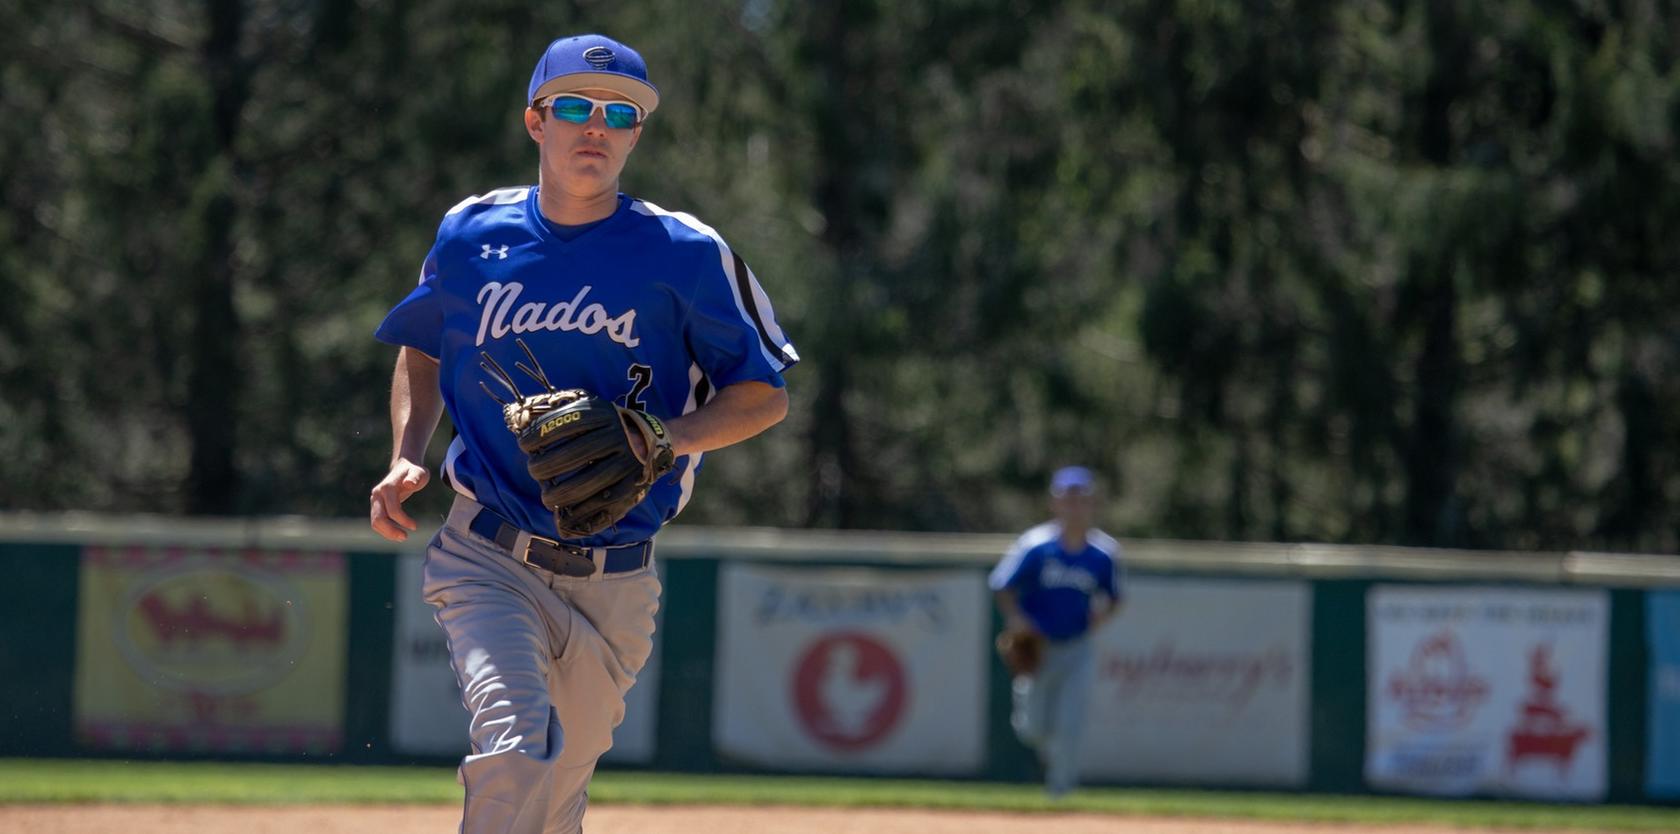 Sophomore infielder Jason Jucker notched a four-hit performance as the Tornados secured their first win of 2020 (Photo courtesy of Thom Kennedy '21).